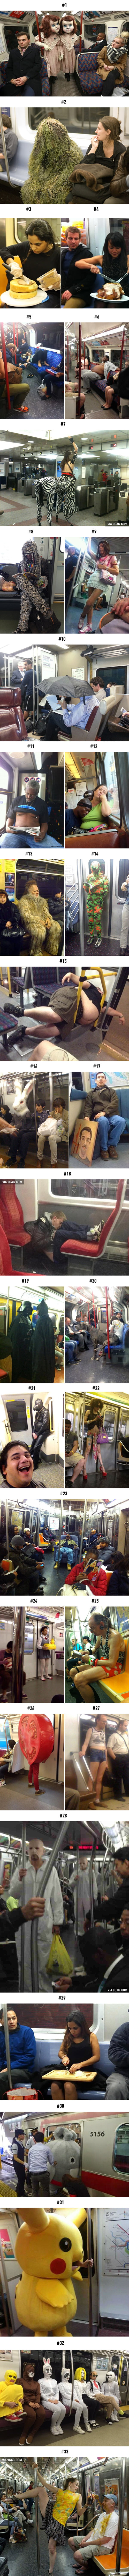 33 Ridiculous Things Ever Spotted On Subway, Make Your Commute Suck Less